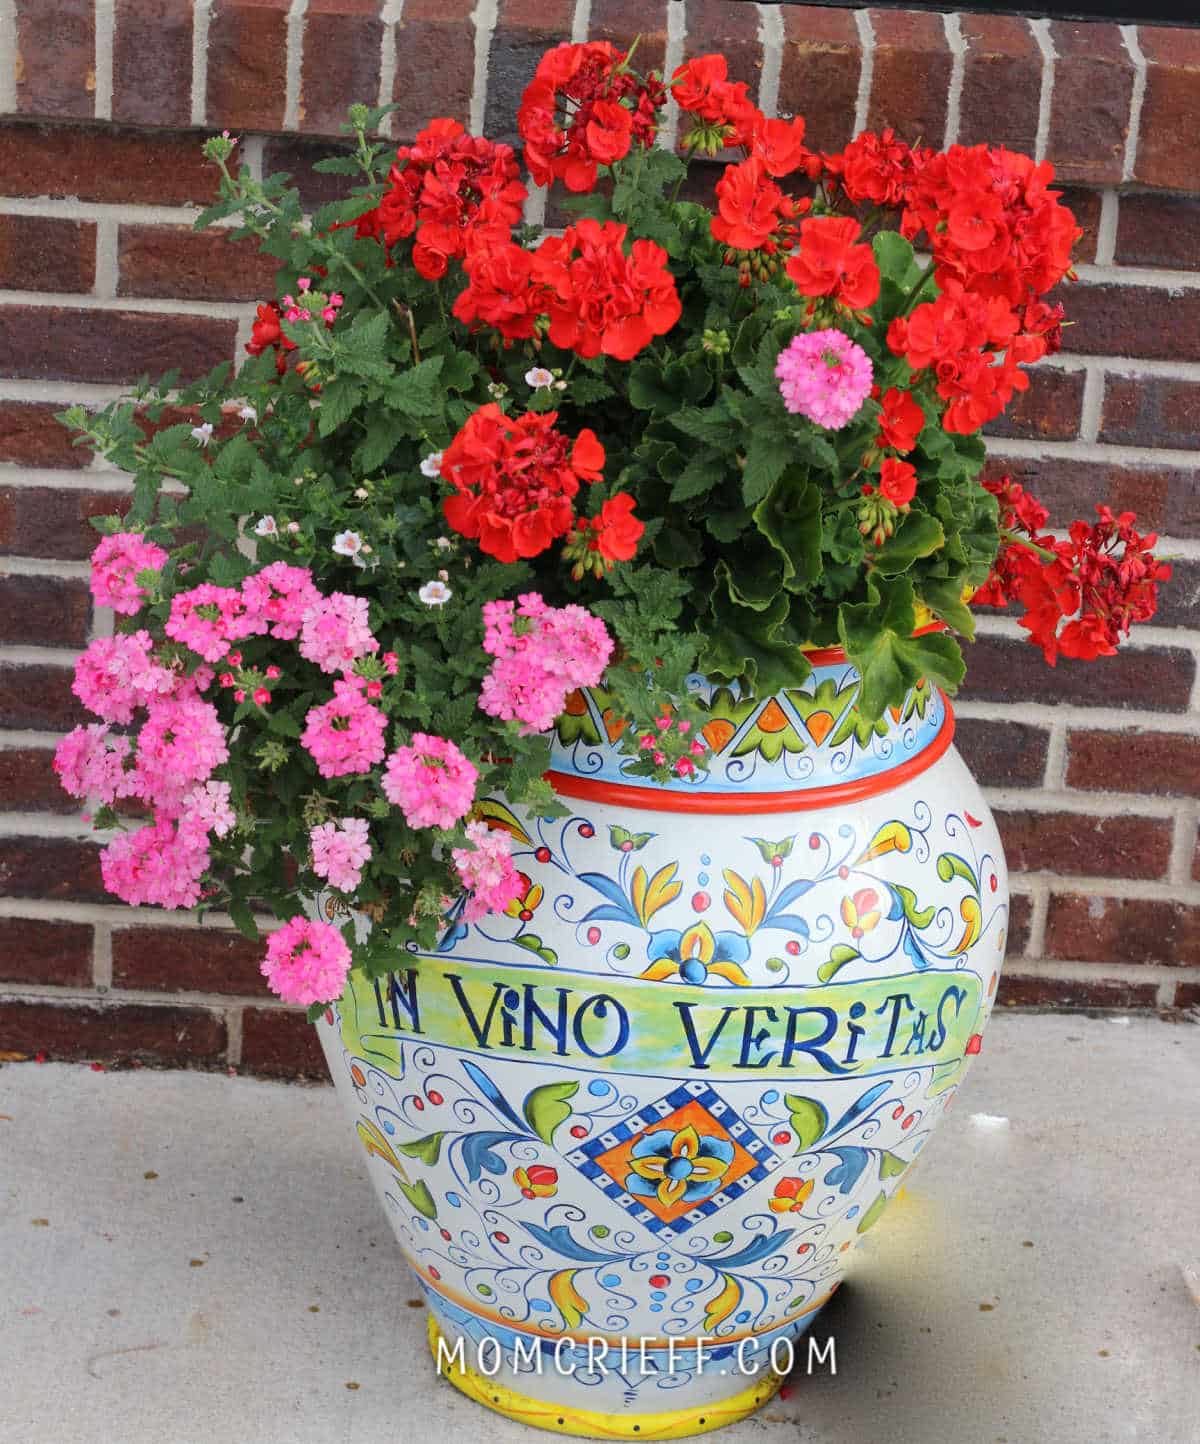 red geraniums and pink flowers in a Italian looking porcelain vessel as a planter